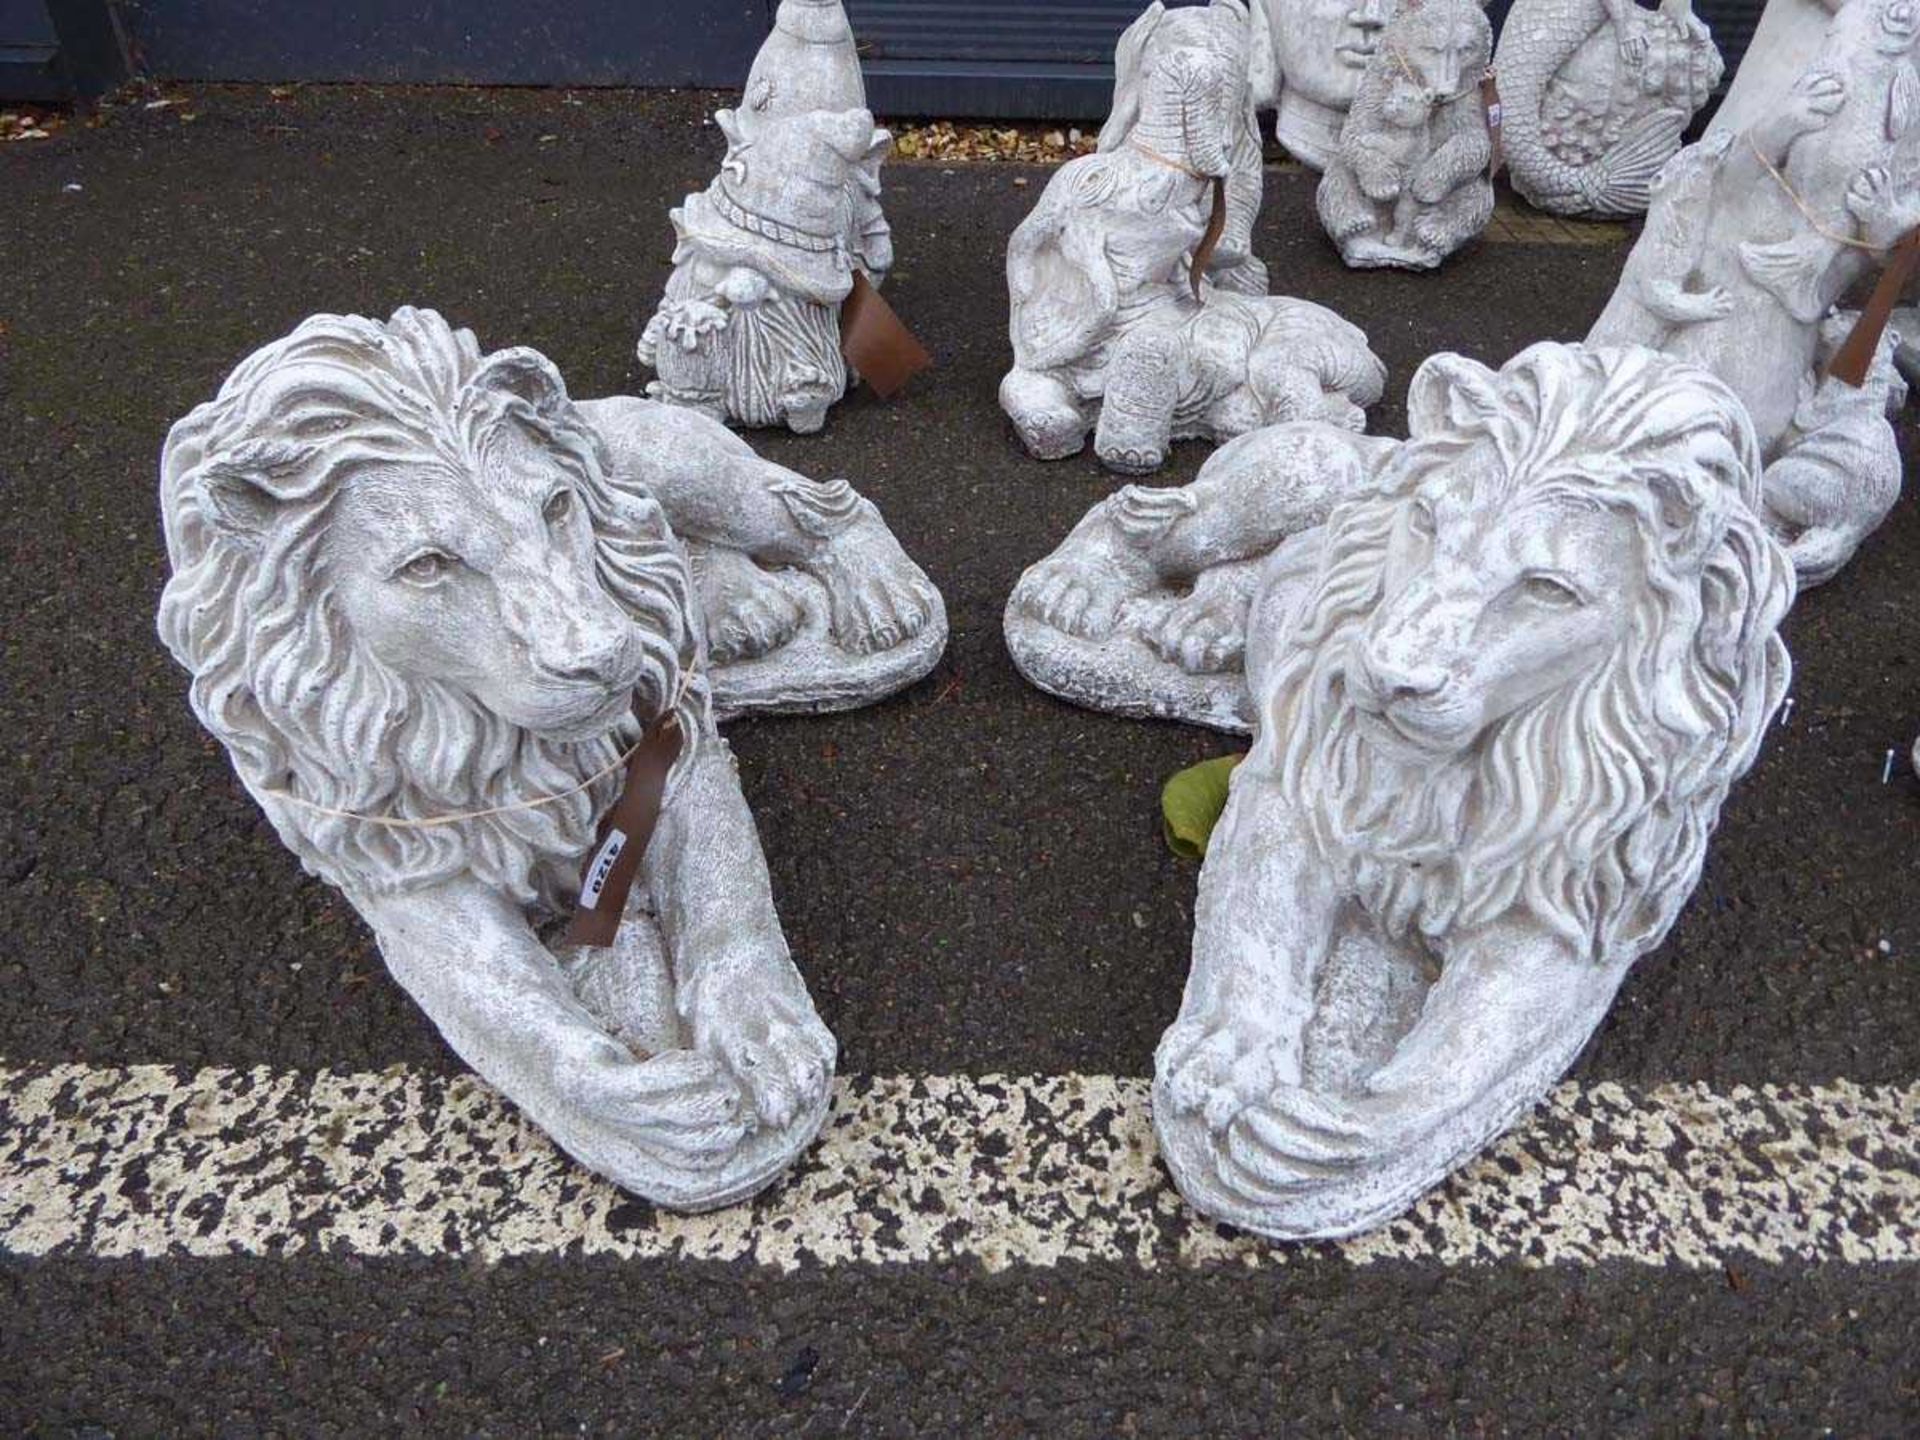 Two large laying concrete lions